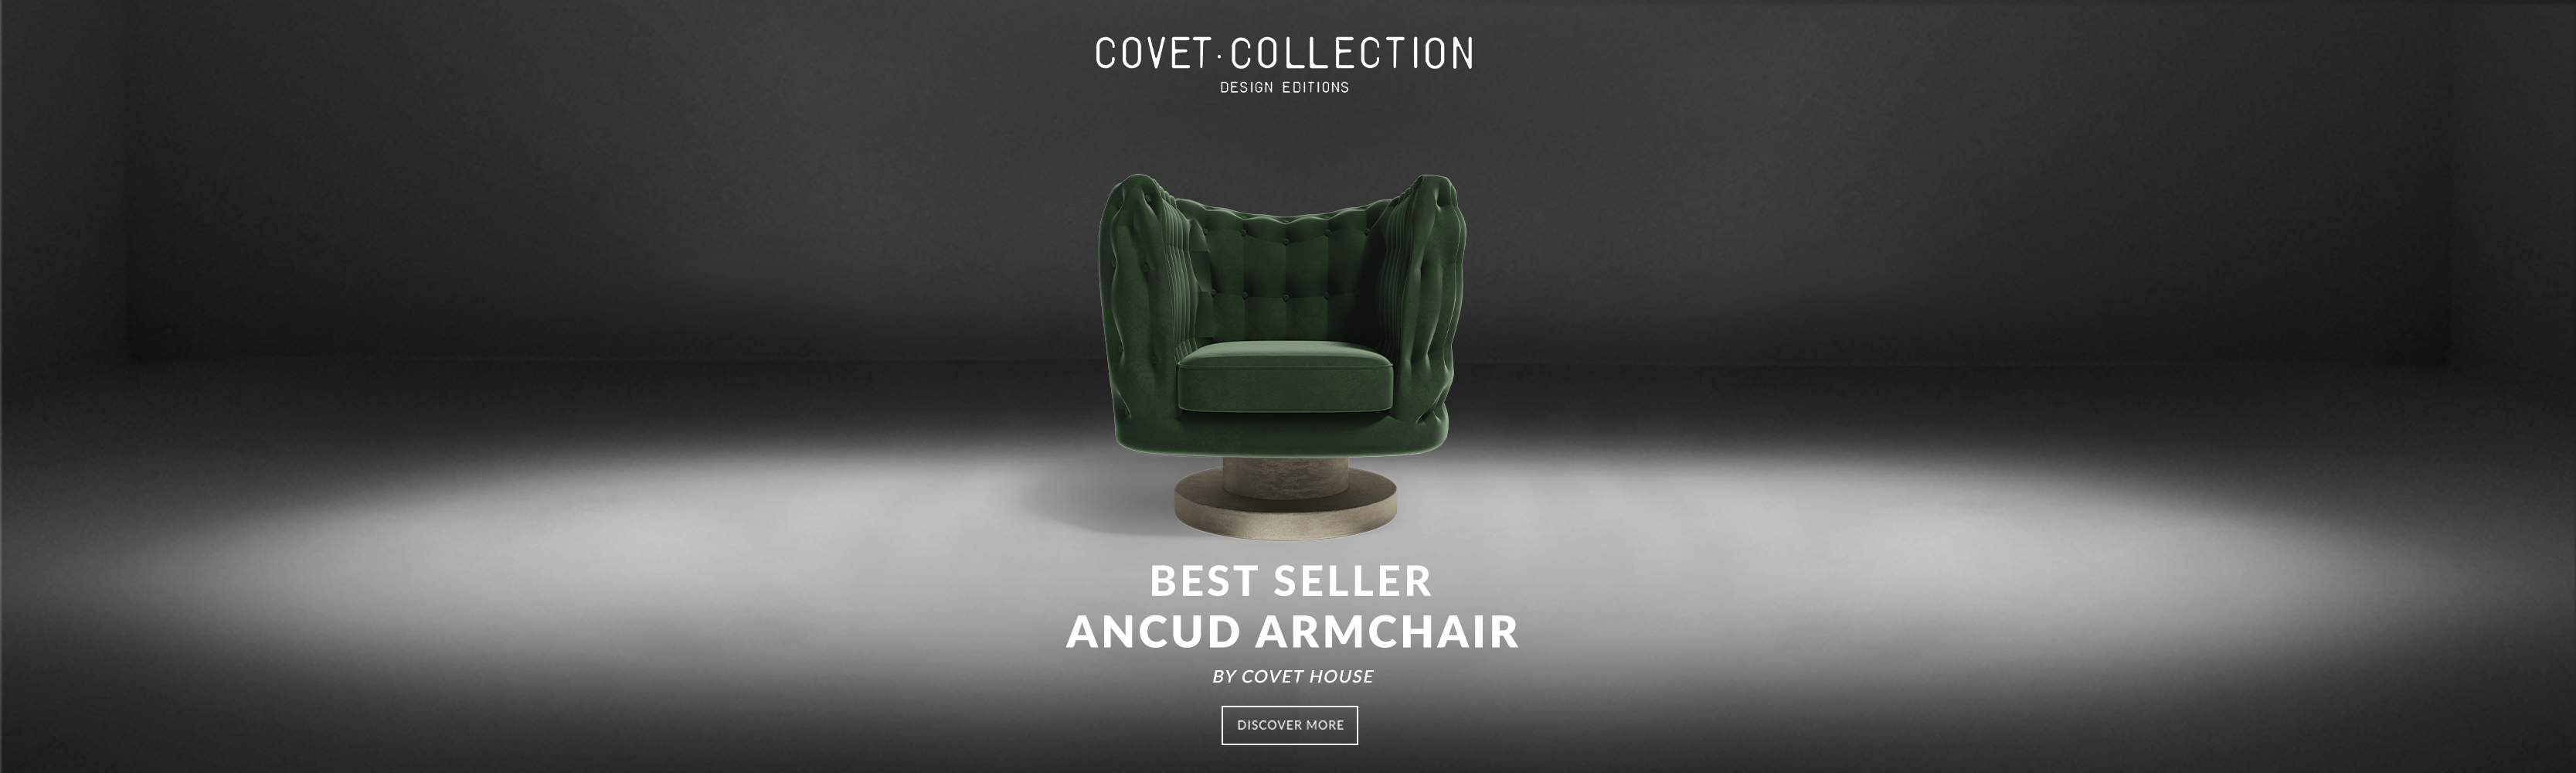 ccollection-ancud